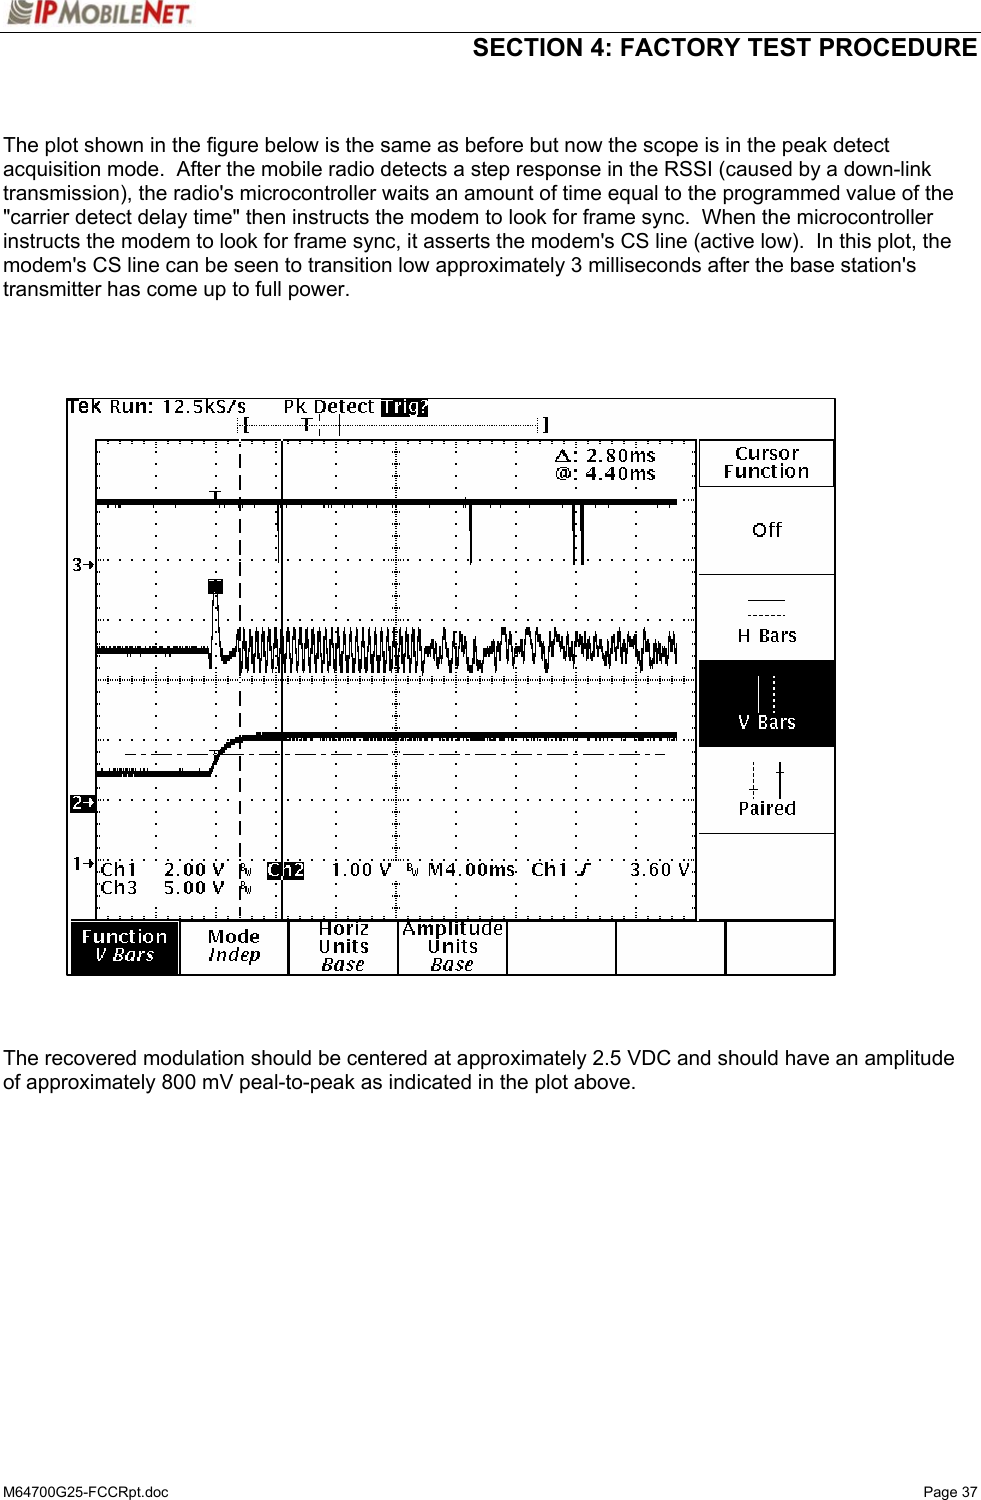  SECTION 4: FACTORY TEST PROCEDURE  M64700G25-FCCRpt.doc   Page 37   The plot shown in the figure below is the same as before but now the scope is in the peak detect acquisition mode.  After the mobile radio detects a step response in the RSSI (caused by a down-link transmission), the radio&apos;s microcontroller waits an amount of time equal to the programmed value of the &quot;carrier detect delay time&quot; then instructs the modem to look for frame sync.  When the microcontroller instructs the modem to look for frame sync, it asserts the modem&apos;s CS line (active low).  In this plot, the modem&apos;s CS line can be seen to transition low approximately 3 milliseconds after the base station&apos;s transmitter has come up to full power.         The recovered modulation should be centered at approximately 2.5 VDC and should have an amplitude of approximately 800 mV peal-to-peak as indicated in the plot above.  